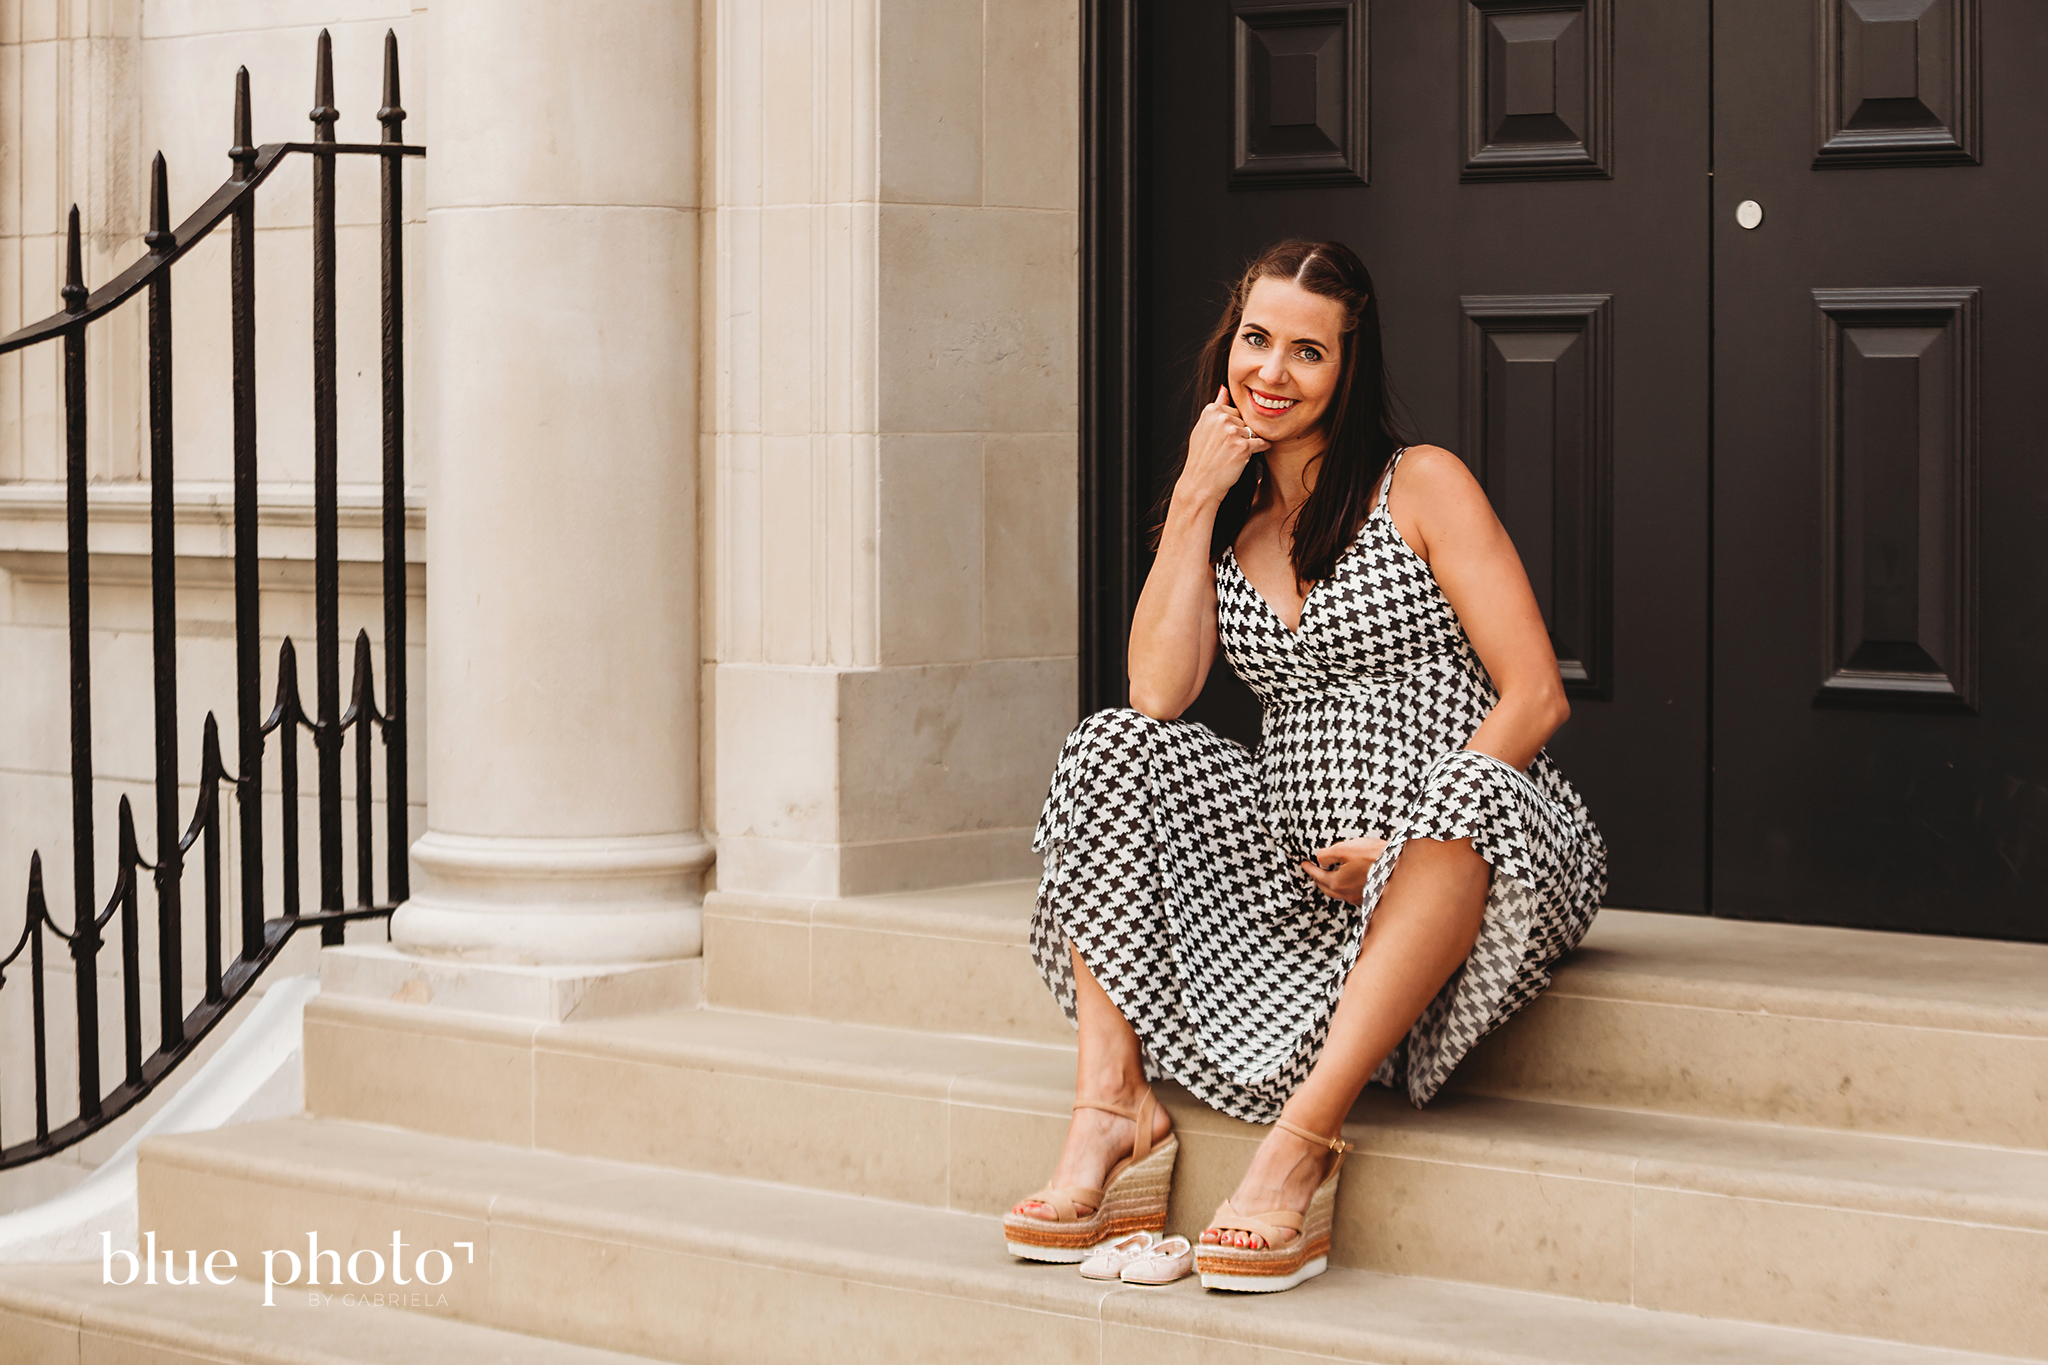 Joanna and her maternity session in Central London, at Buckingham Palace